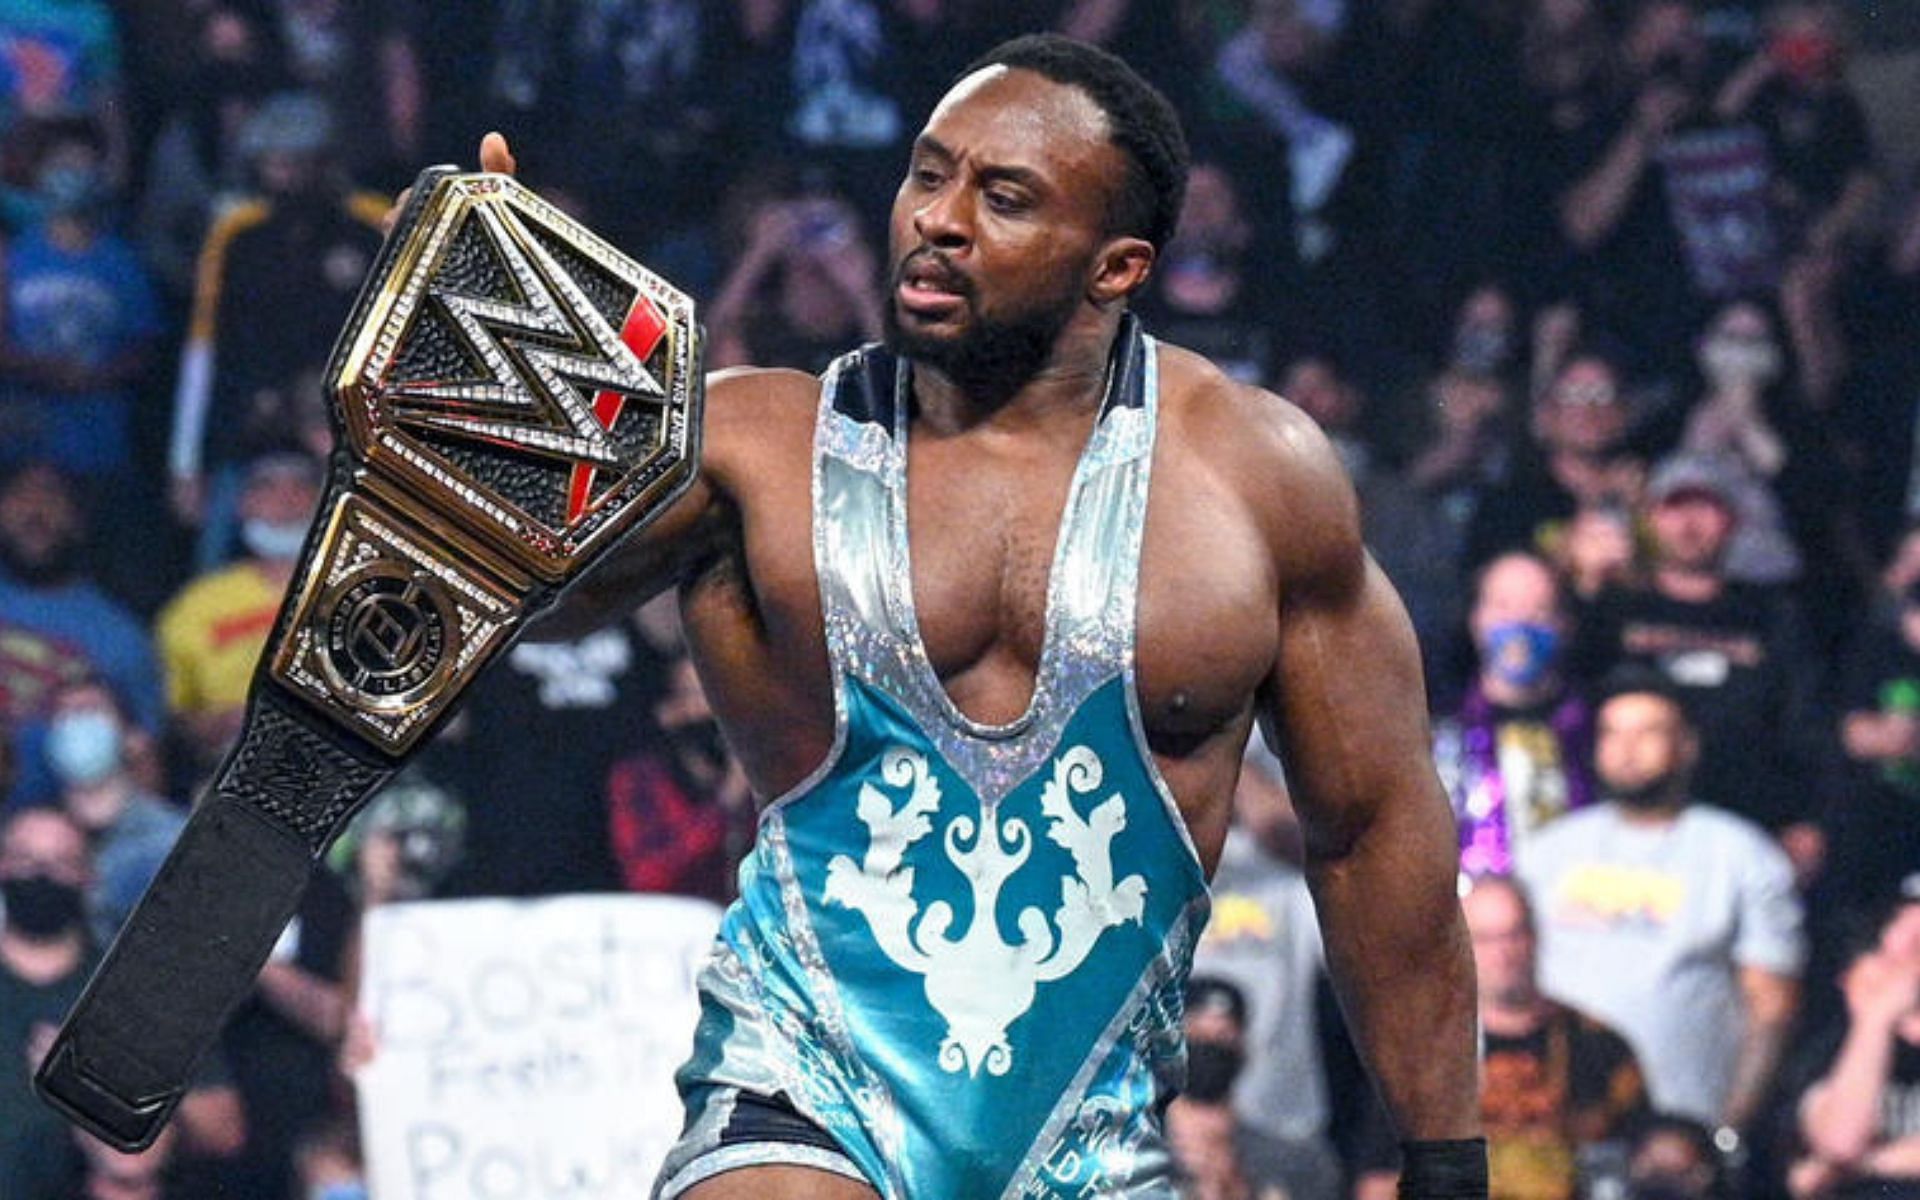 Big E could be ready for a historic return to action at WrestleMania!